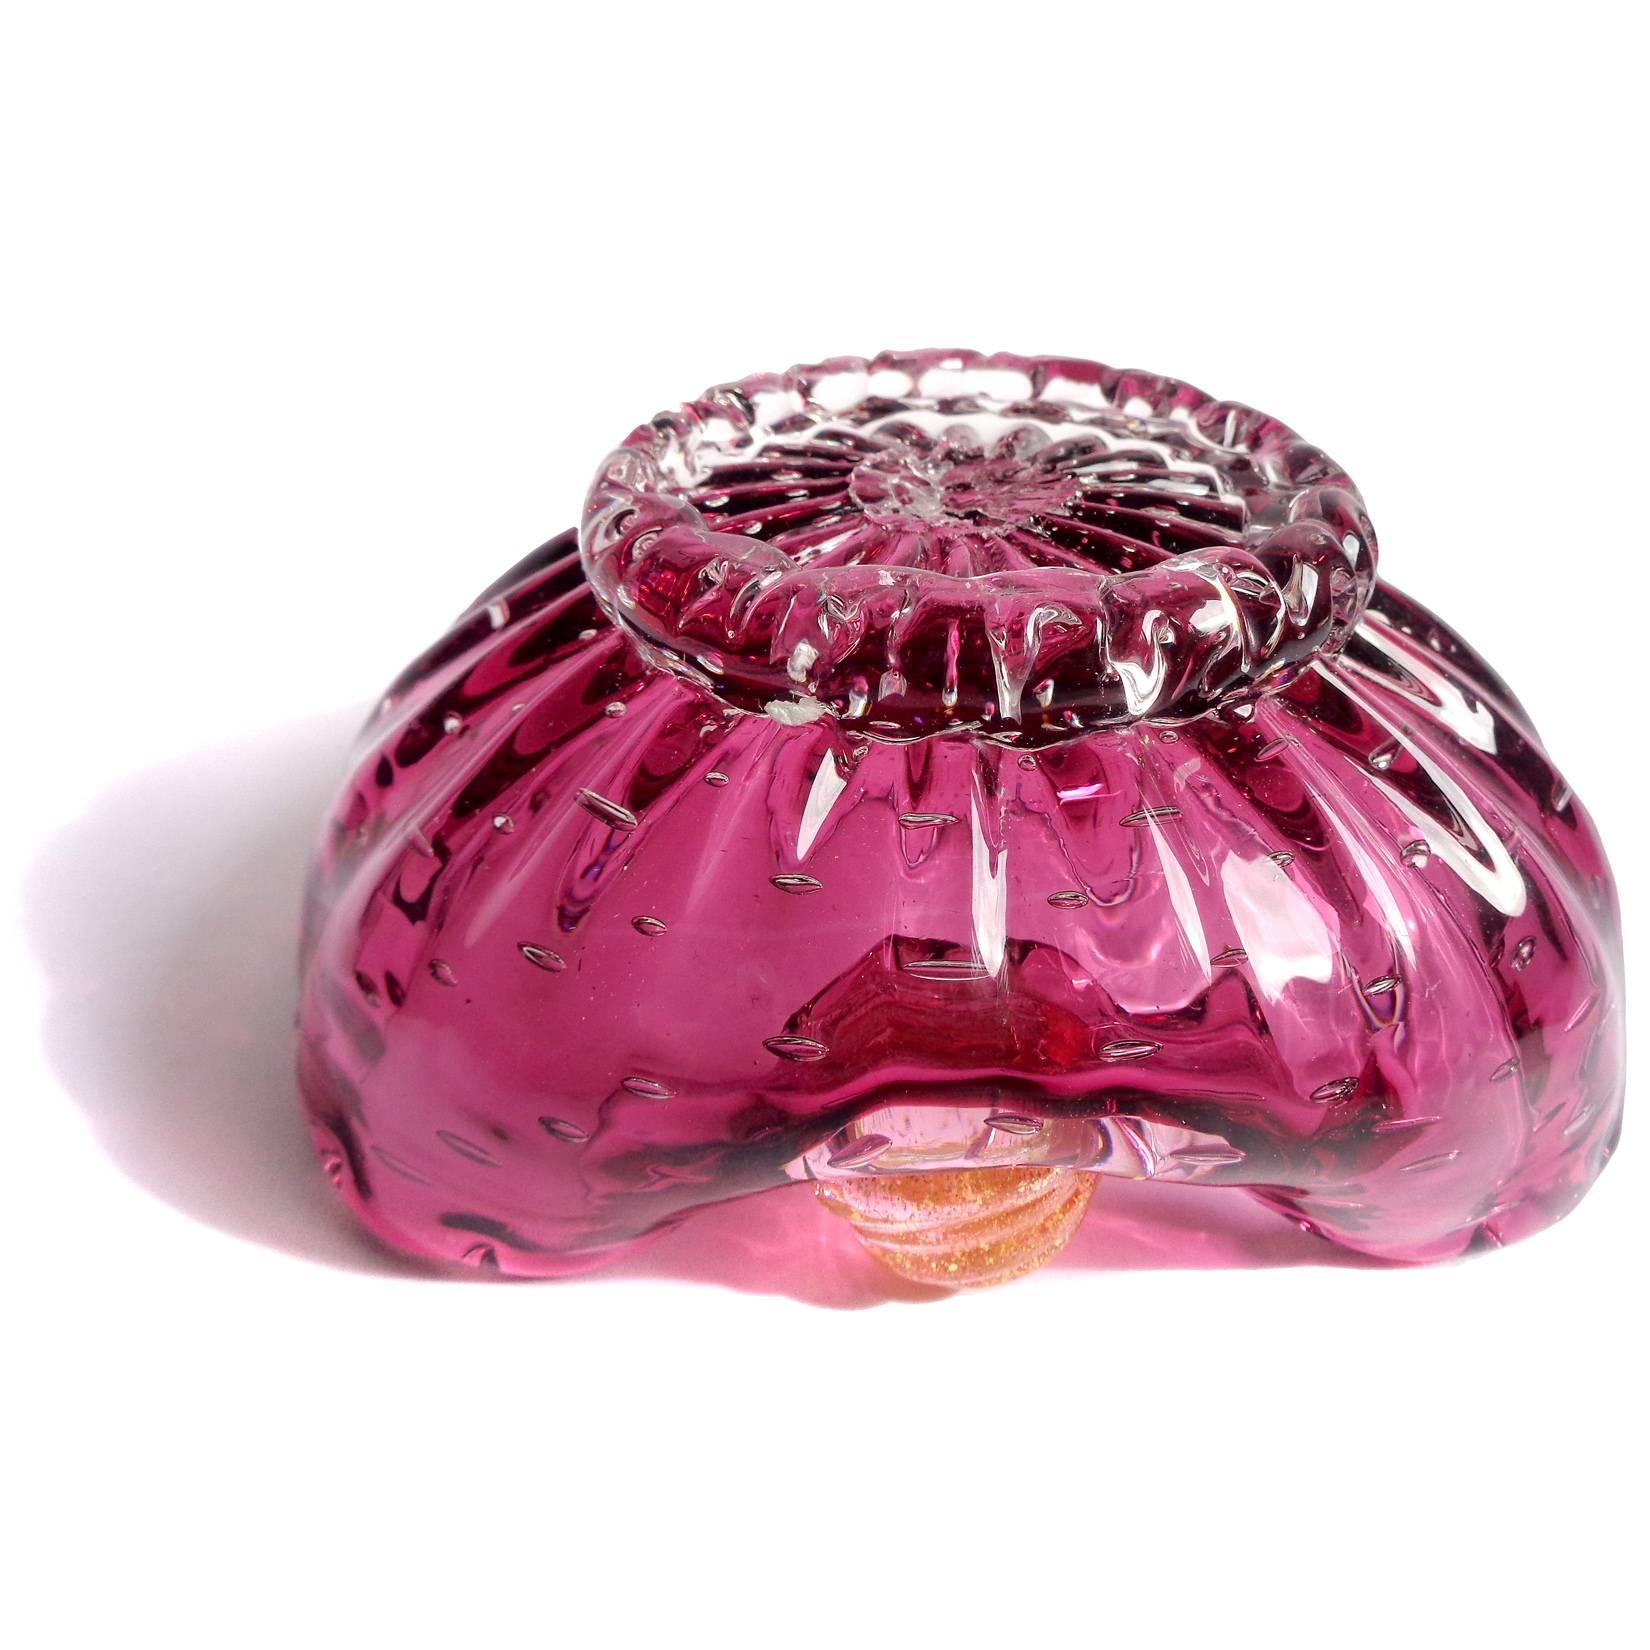 Hand-Crafted Murano Amethyst Pink, Gold, Bubbles Italian Art Glass Decorative Bowls